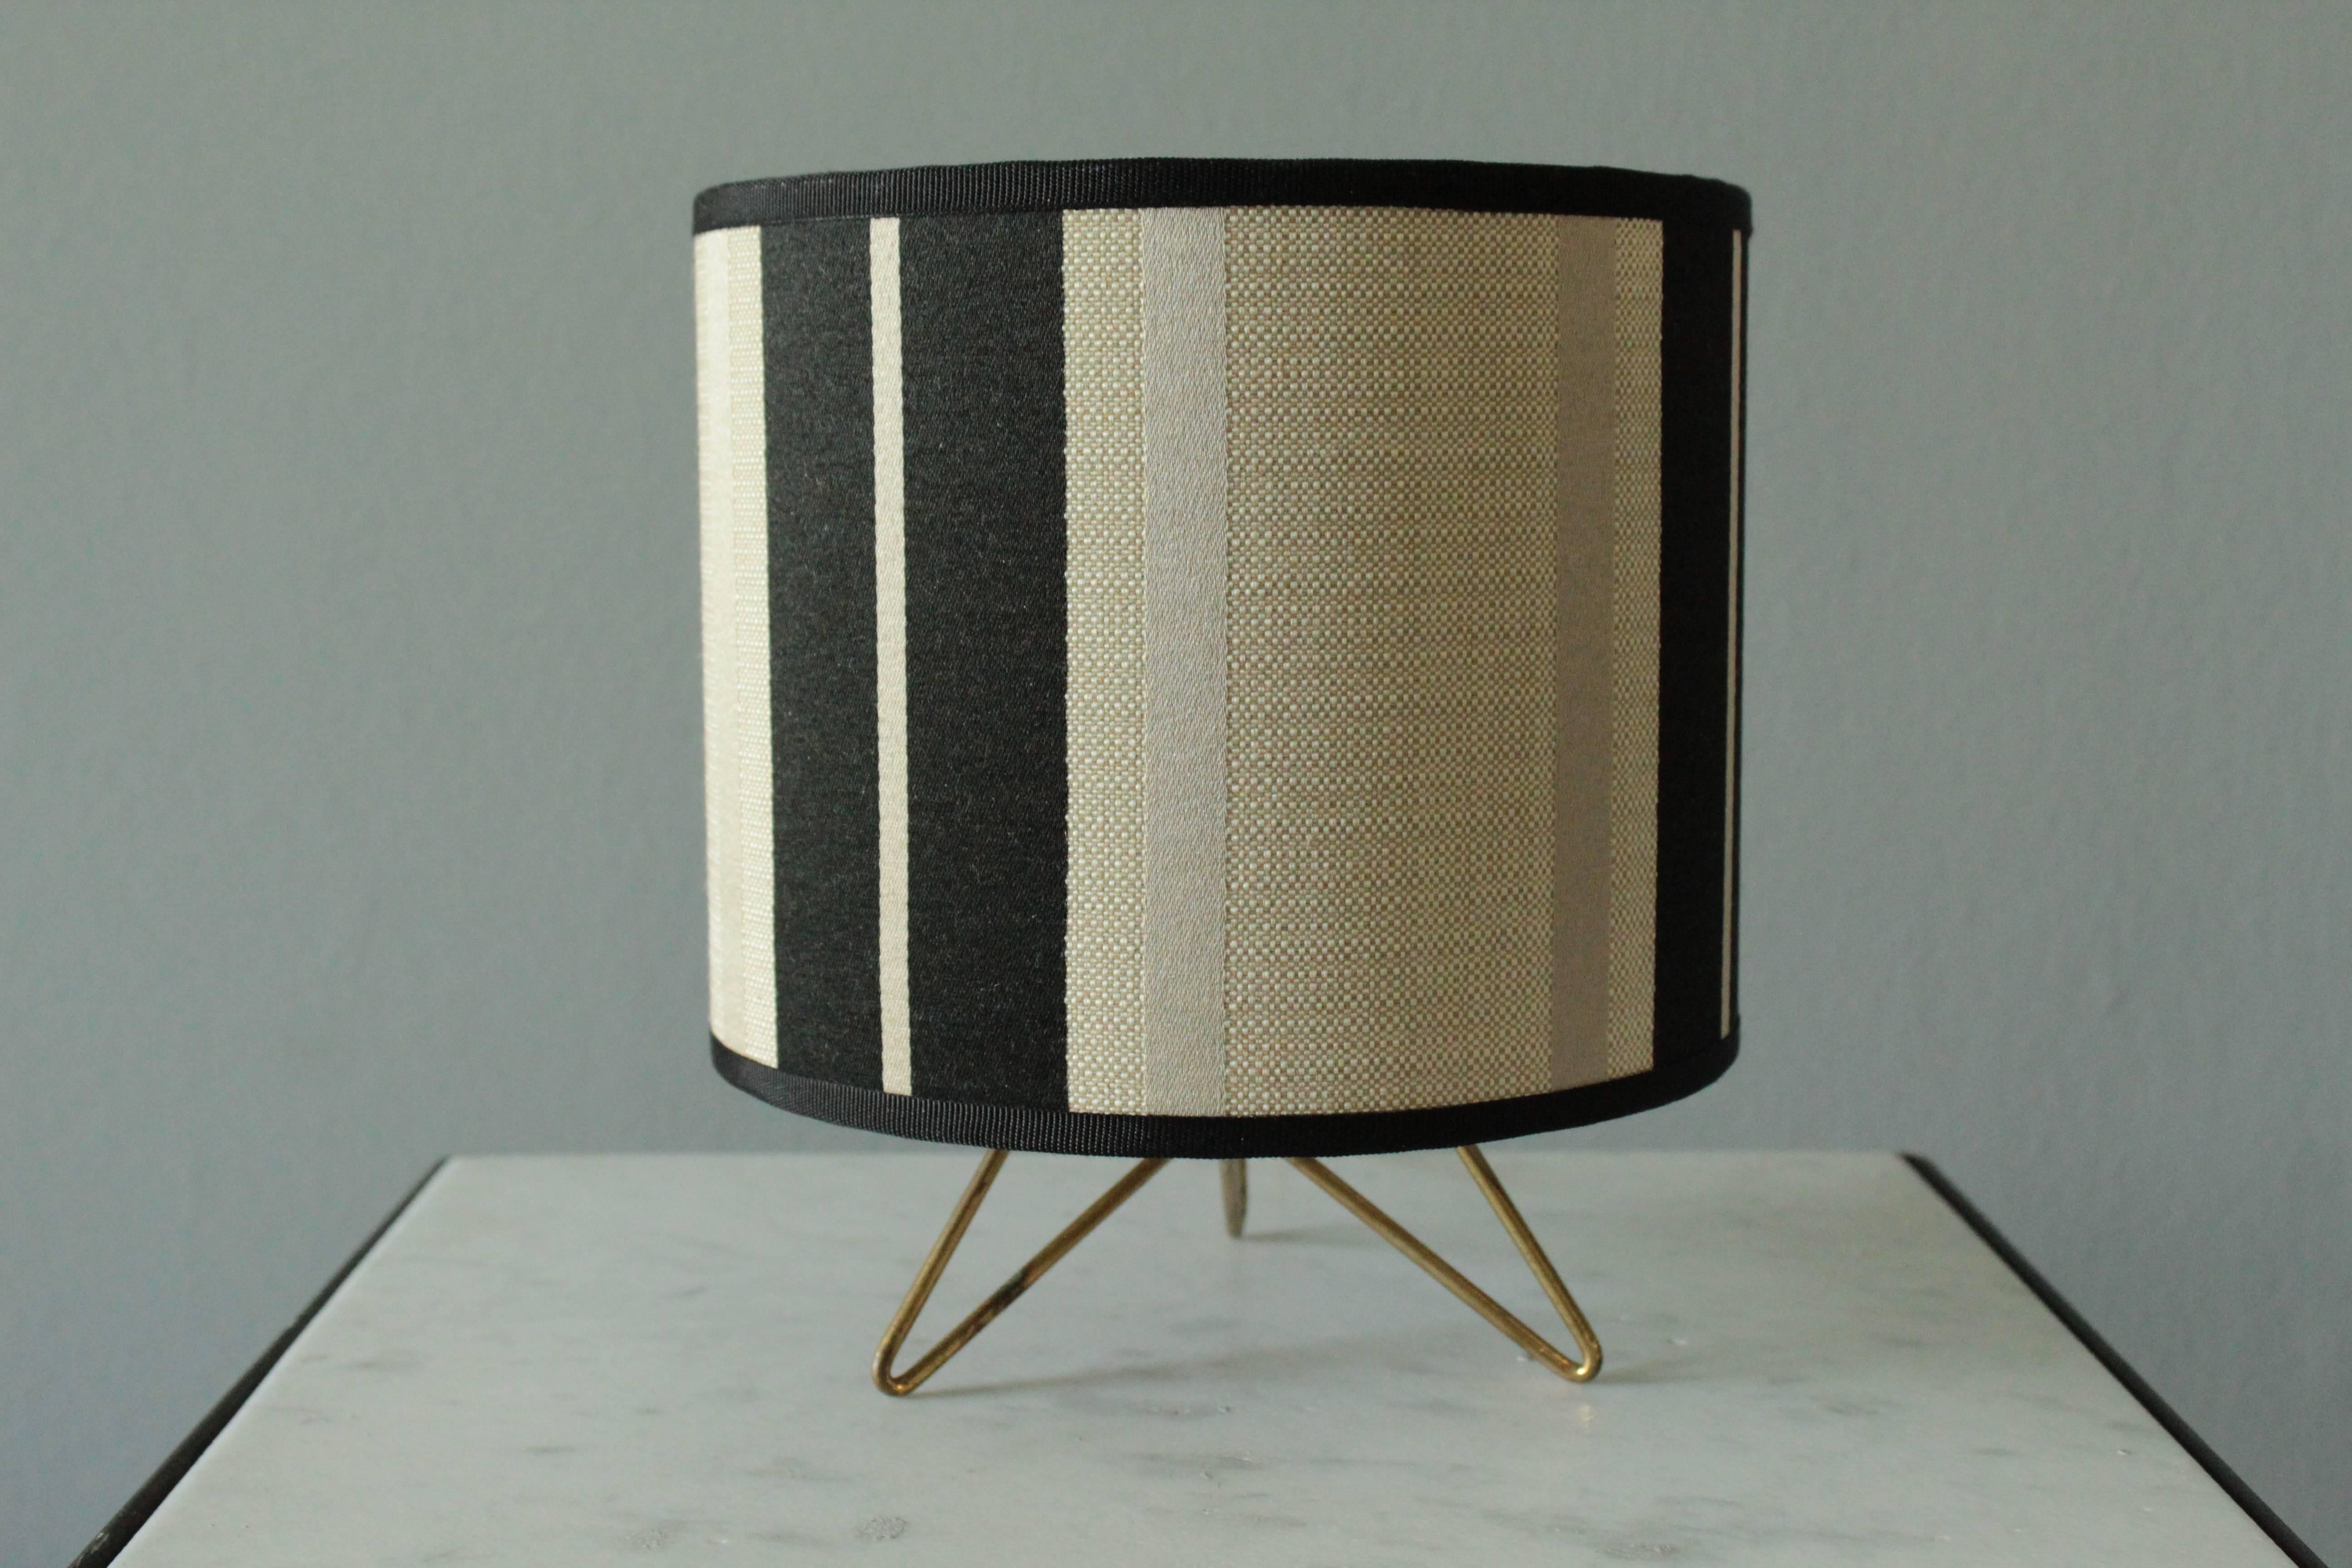 Table lamp with lampshade made of striped jacquard. Made in Italy, circa 1950.